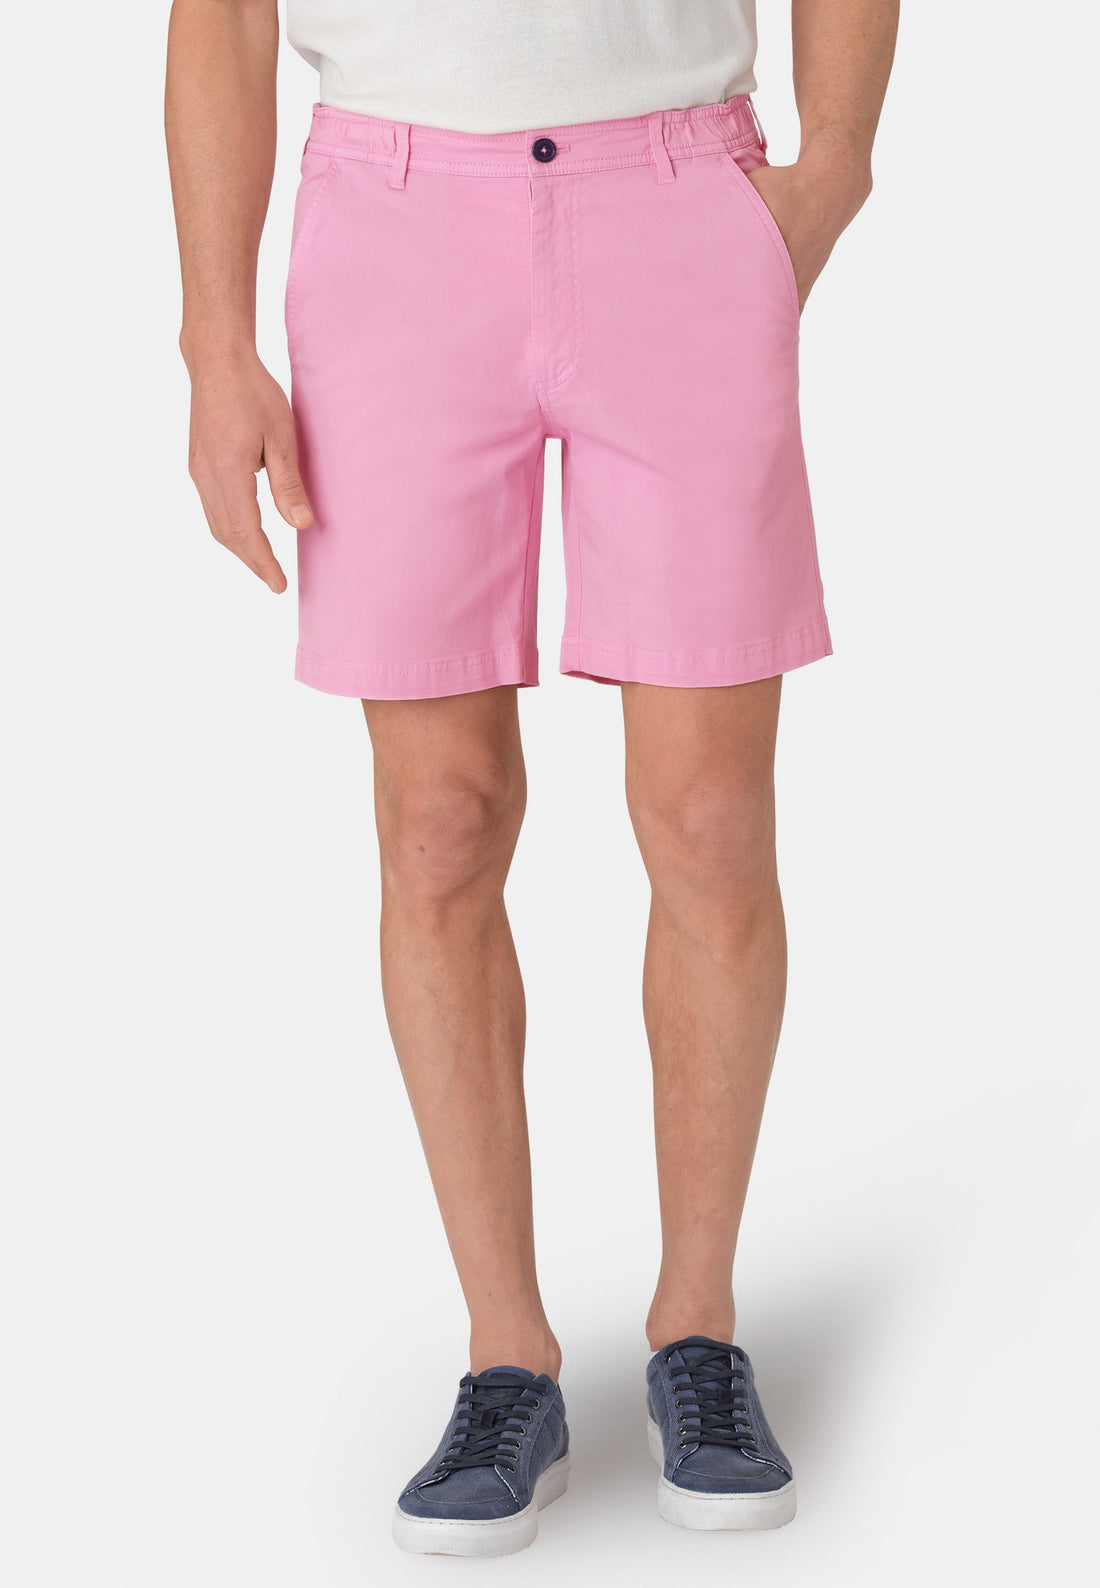 Ribblesdale Summer Shorts - Baby Pink